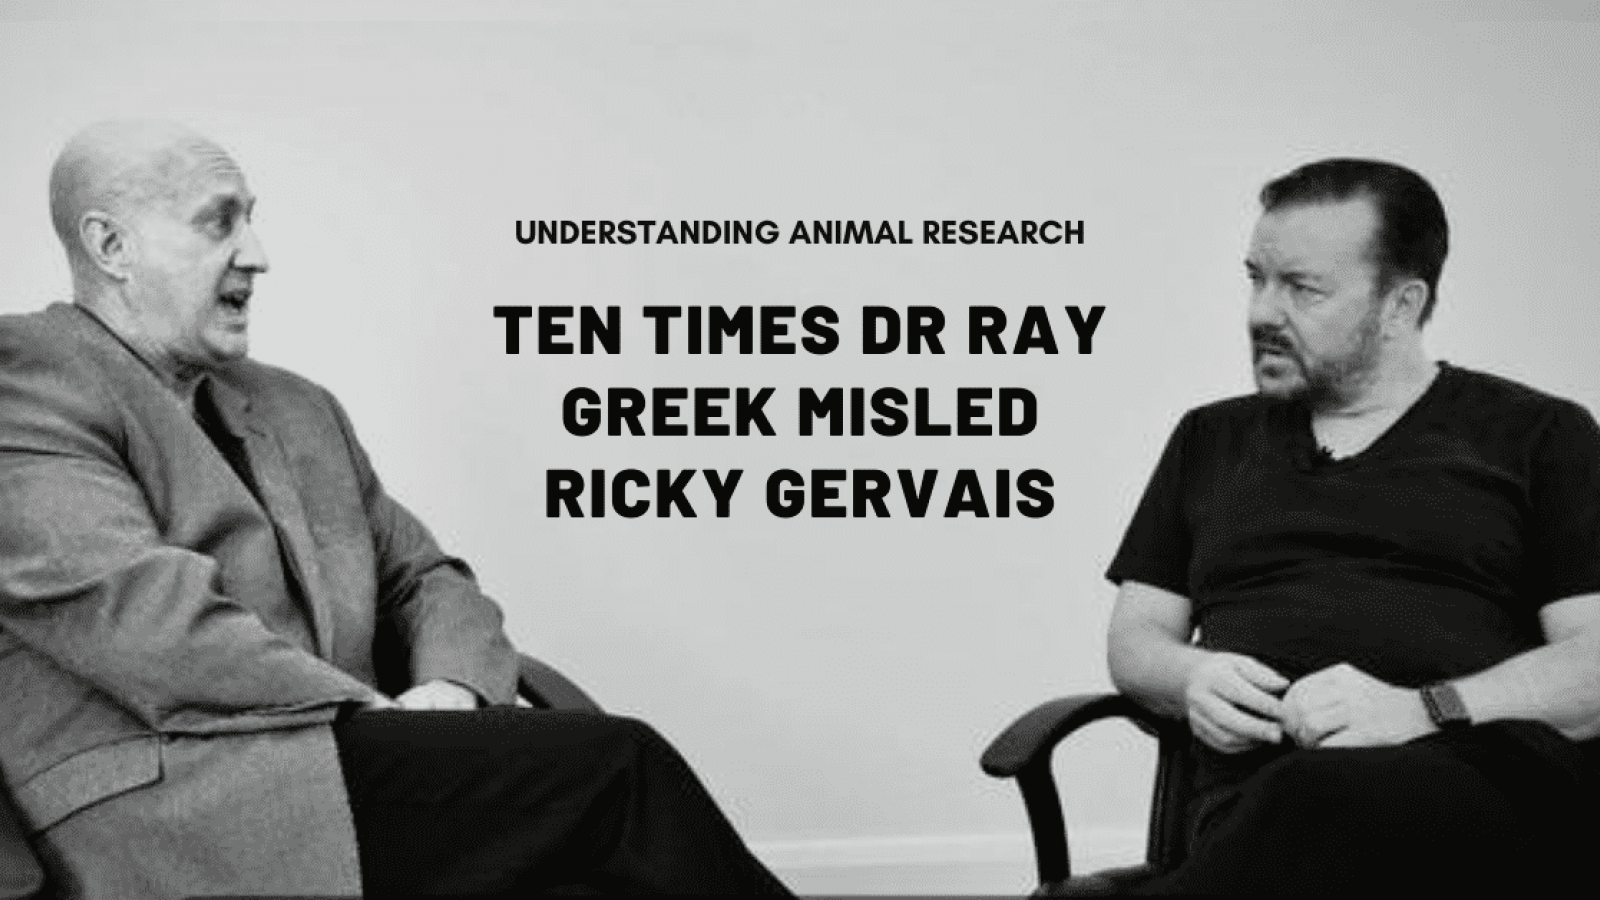 Ten times Dr Ray Greek misled Ricky Gervais about animal testing